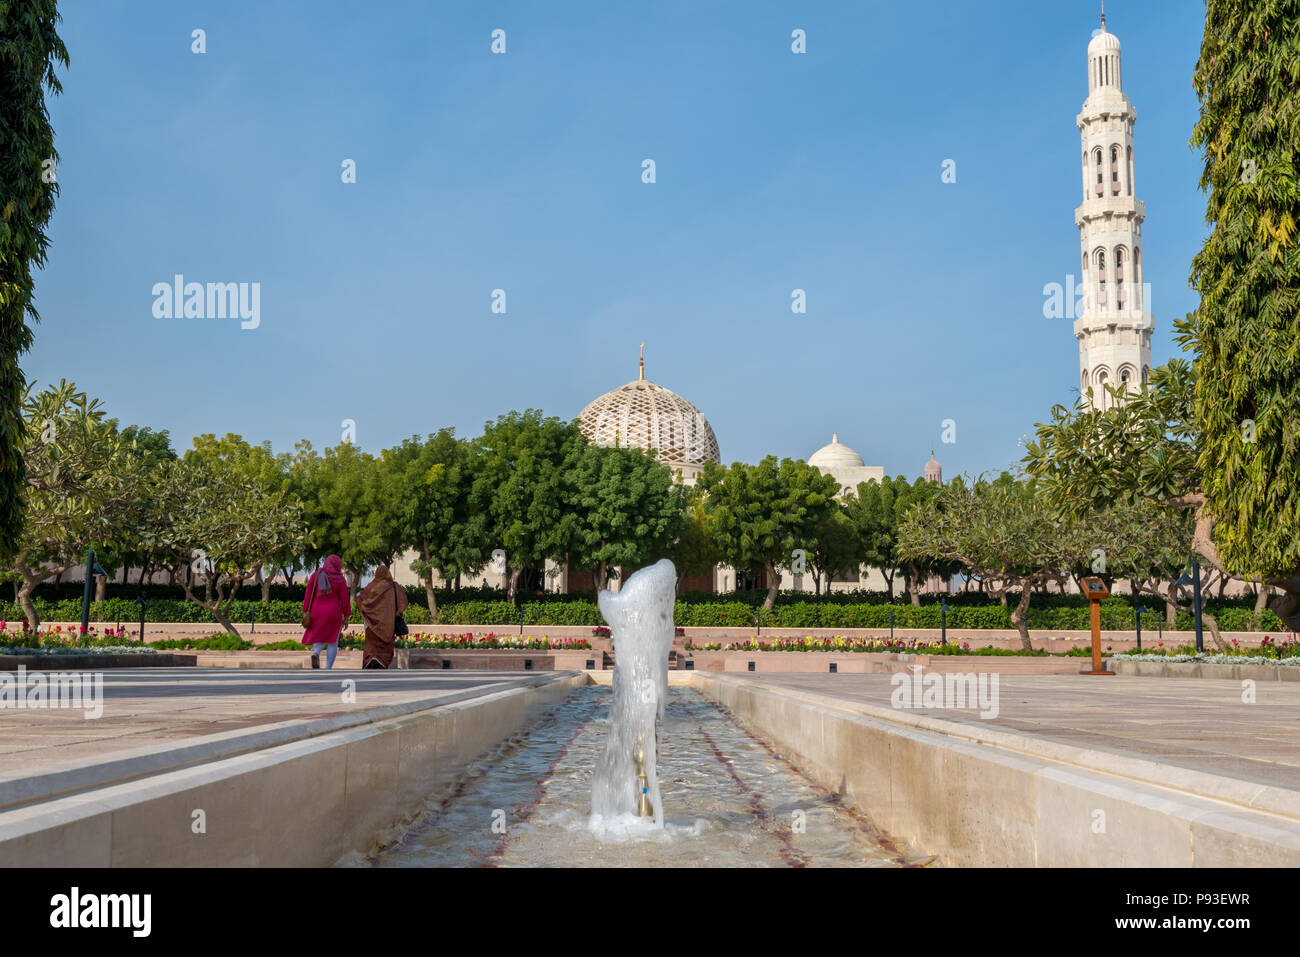 Visitors to the Sultan Qaboos Grand Mosque in Muscat, Oman walking through the formal gardens toward the main prayer hall Stock Photo